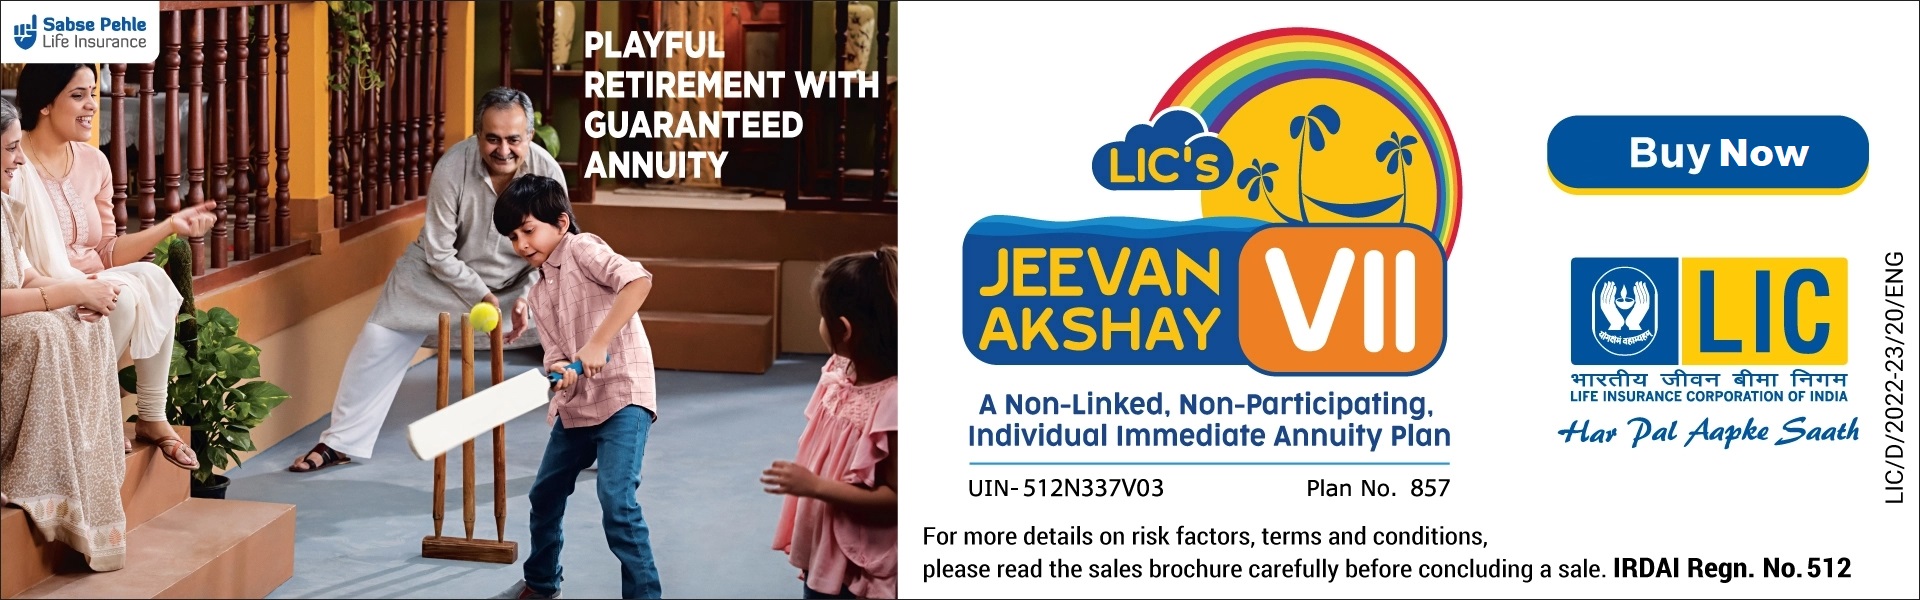 LIC LIFE CERTIFICATE - WHEN TO SUBMIT, Jeevan Akshay 7 Lic India Guaranteed Pension Buy 9886568000 Buy, lic pension plan, lic pension, lic best returns